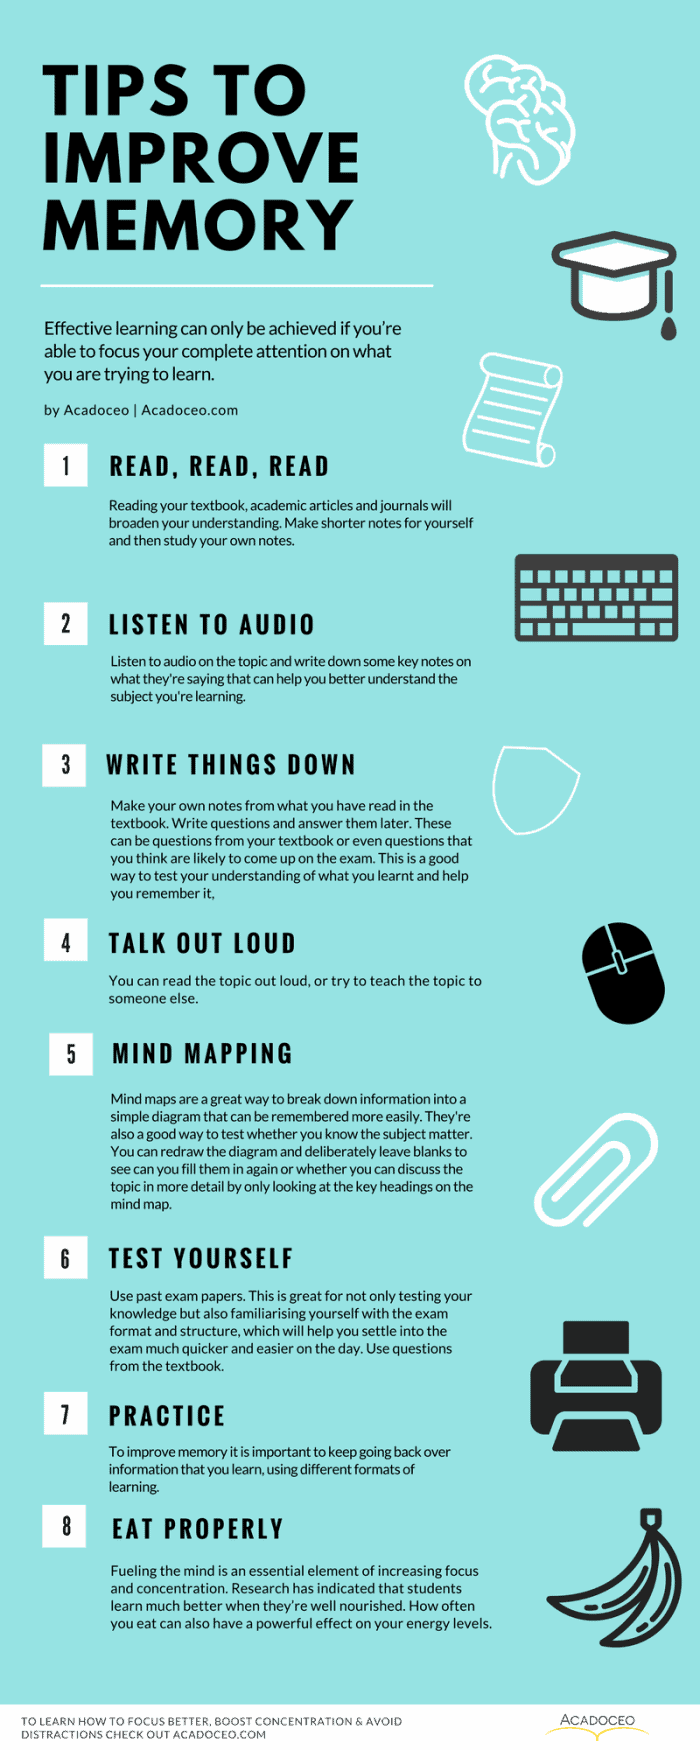 Tips-to-improve-memory-infographic